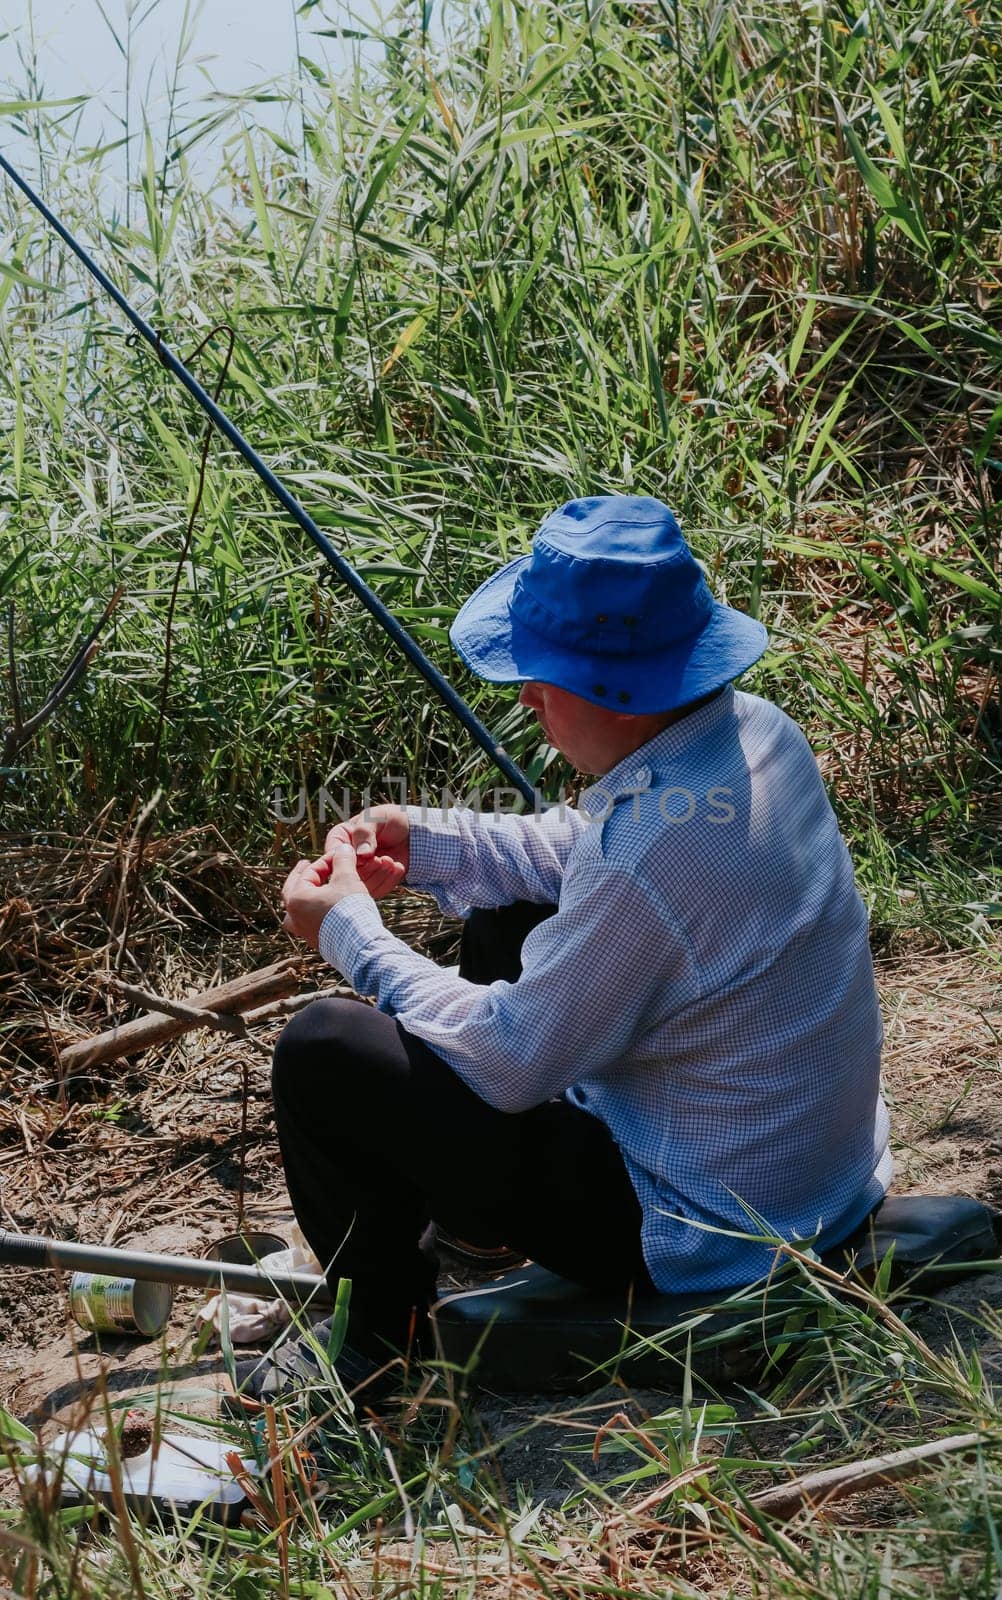 One Caucasian young man in old clothes with a blue hat on his head puts a worm on a fishing rod hook while sitting on the shore of a lake in tall grass on a sunny summer day, close-up side view.